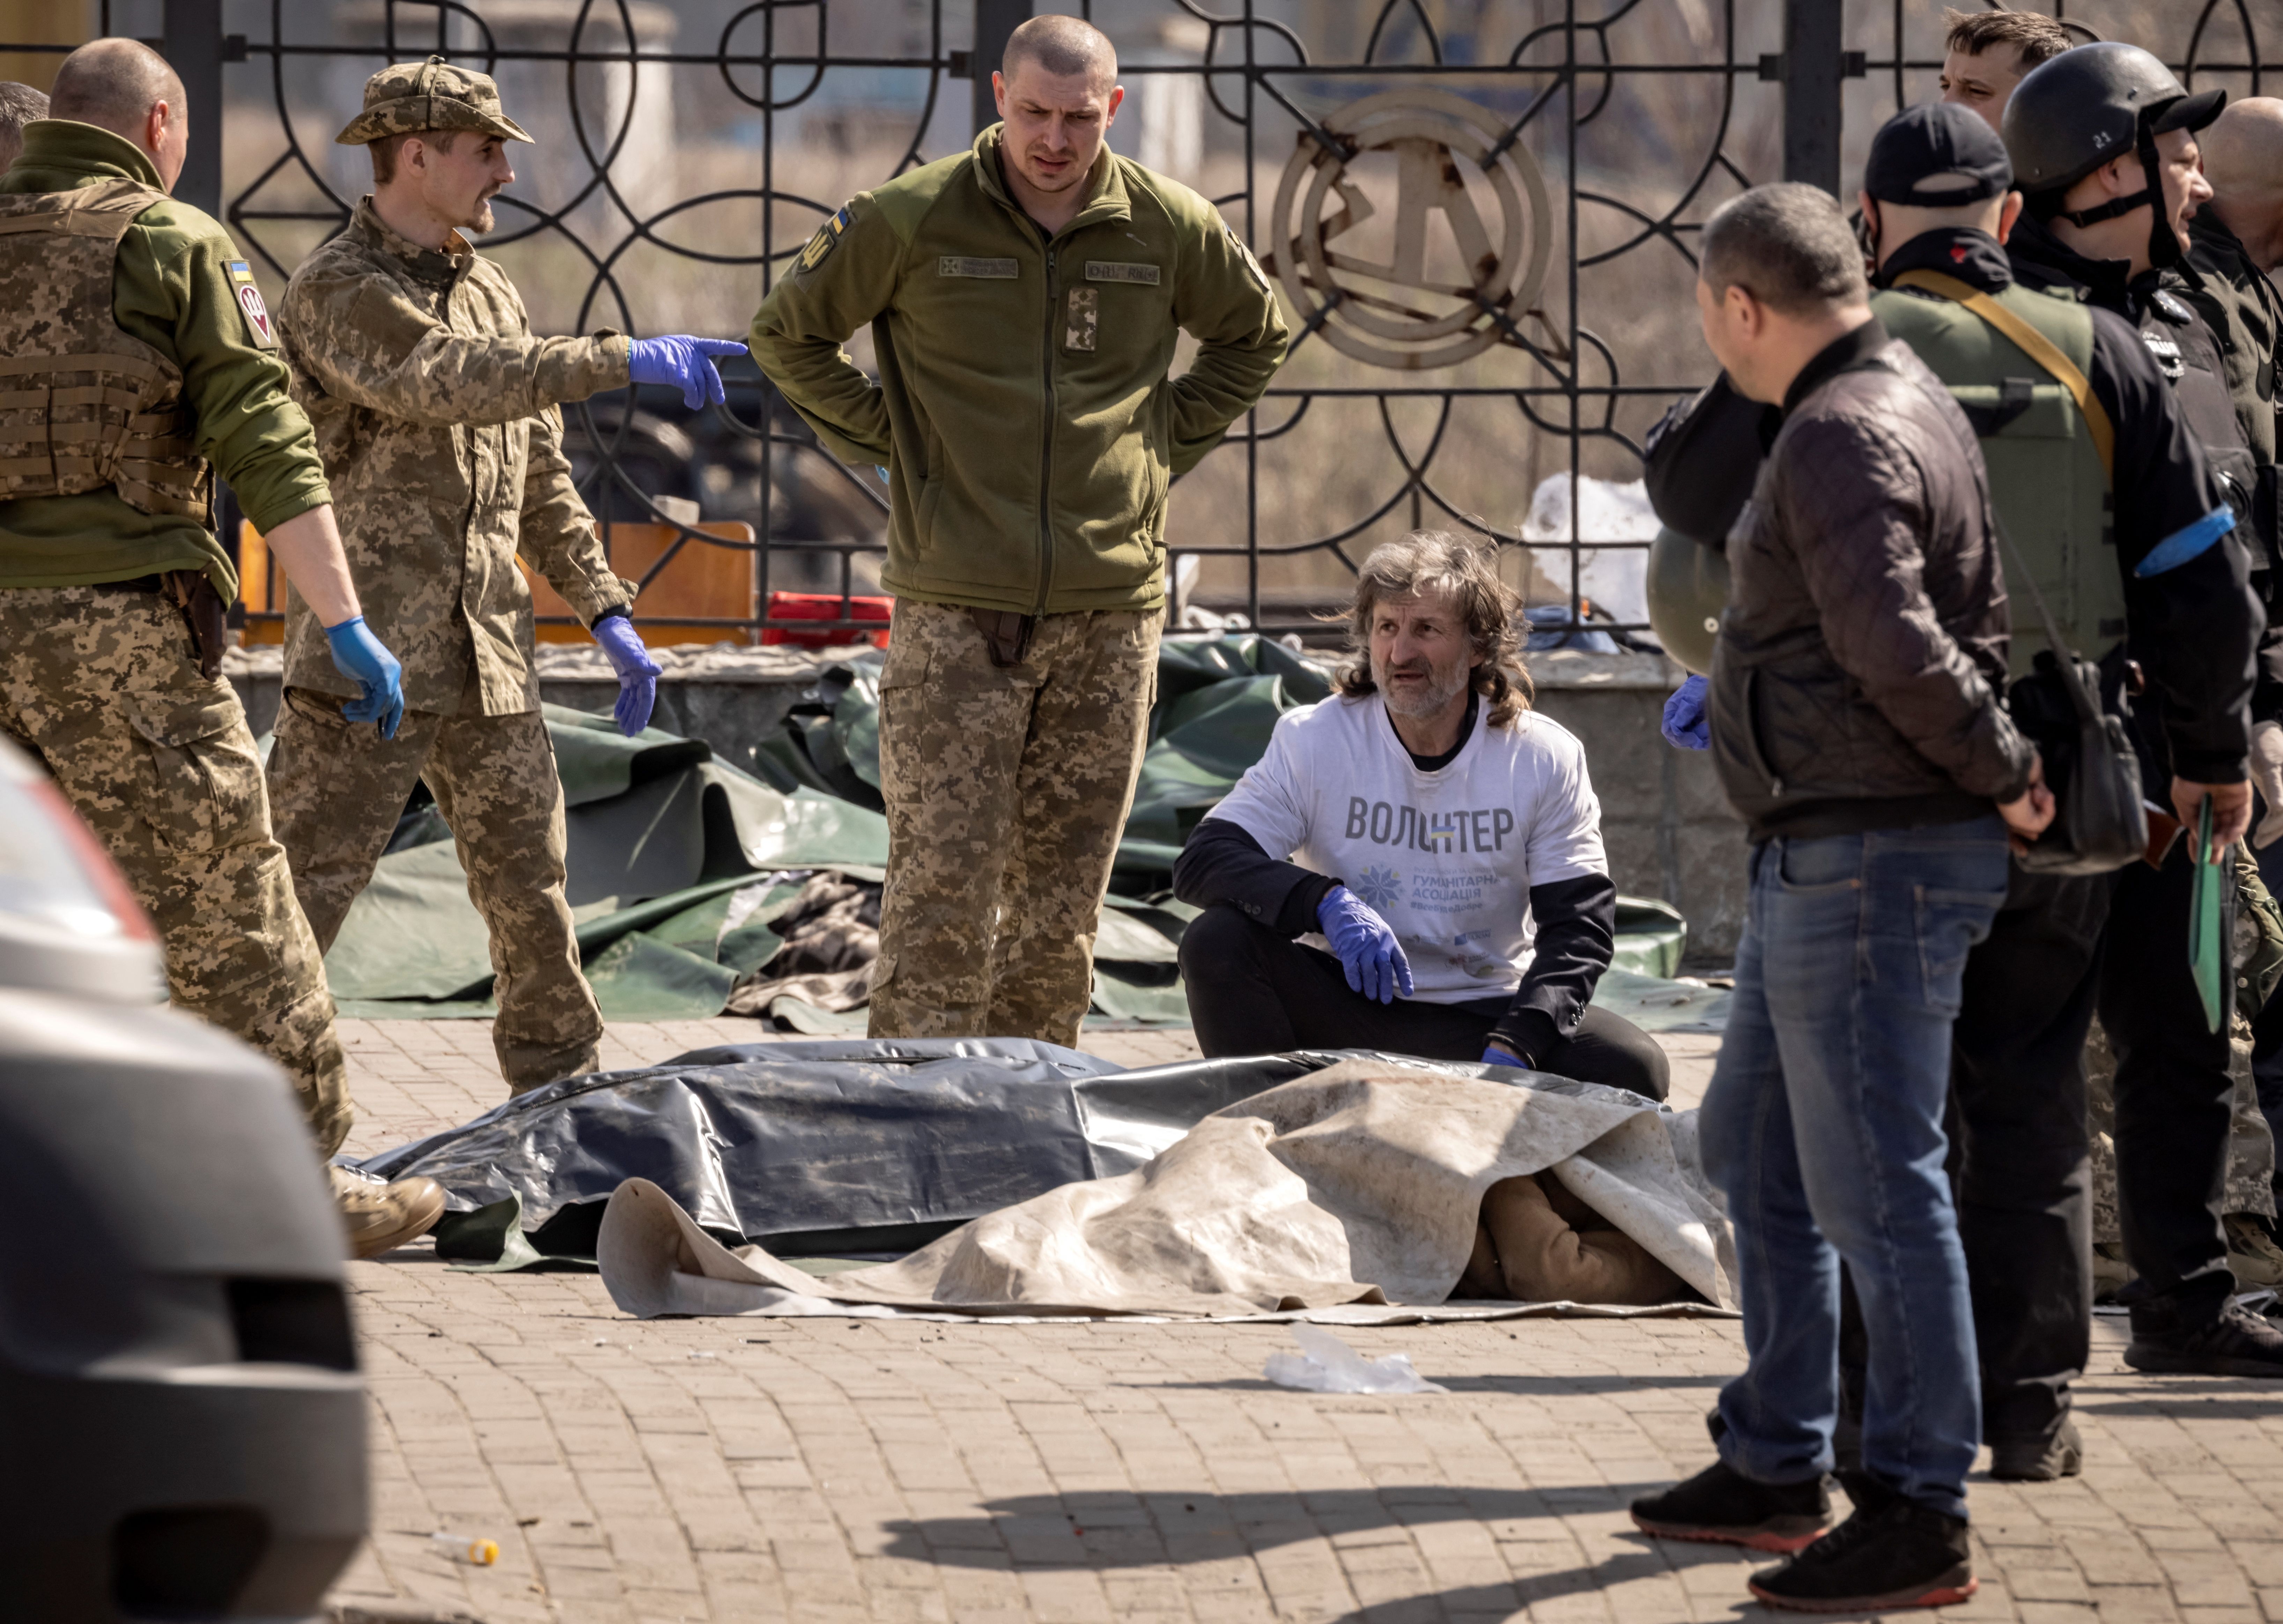 Ukrainian soldiers clear out bodies after a rocket attack at a train station in Kramatorsk, Ukraine, on April 8.